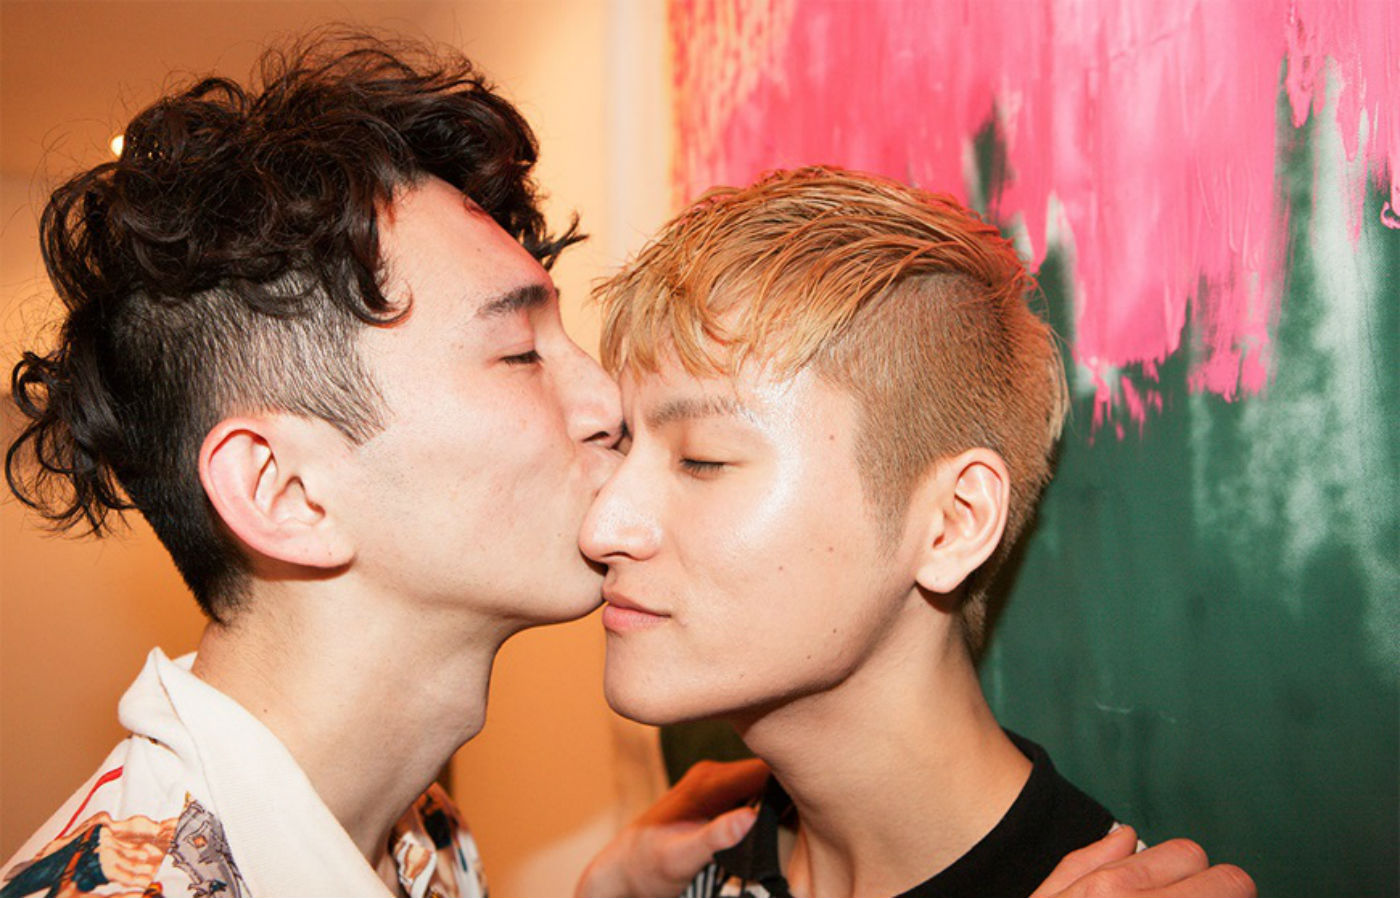 Another Japanese city to recognise same-sex relationships.